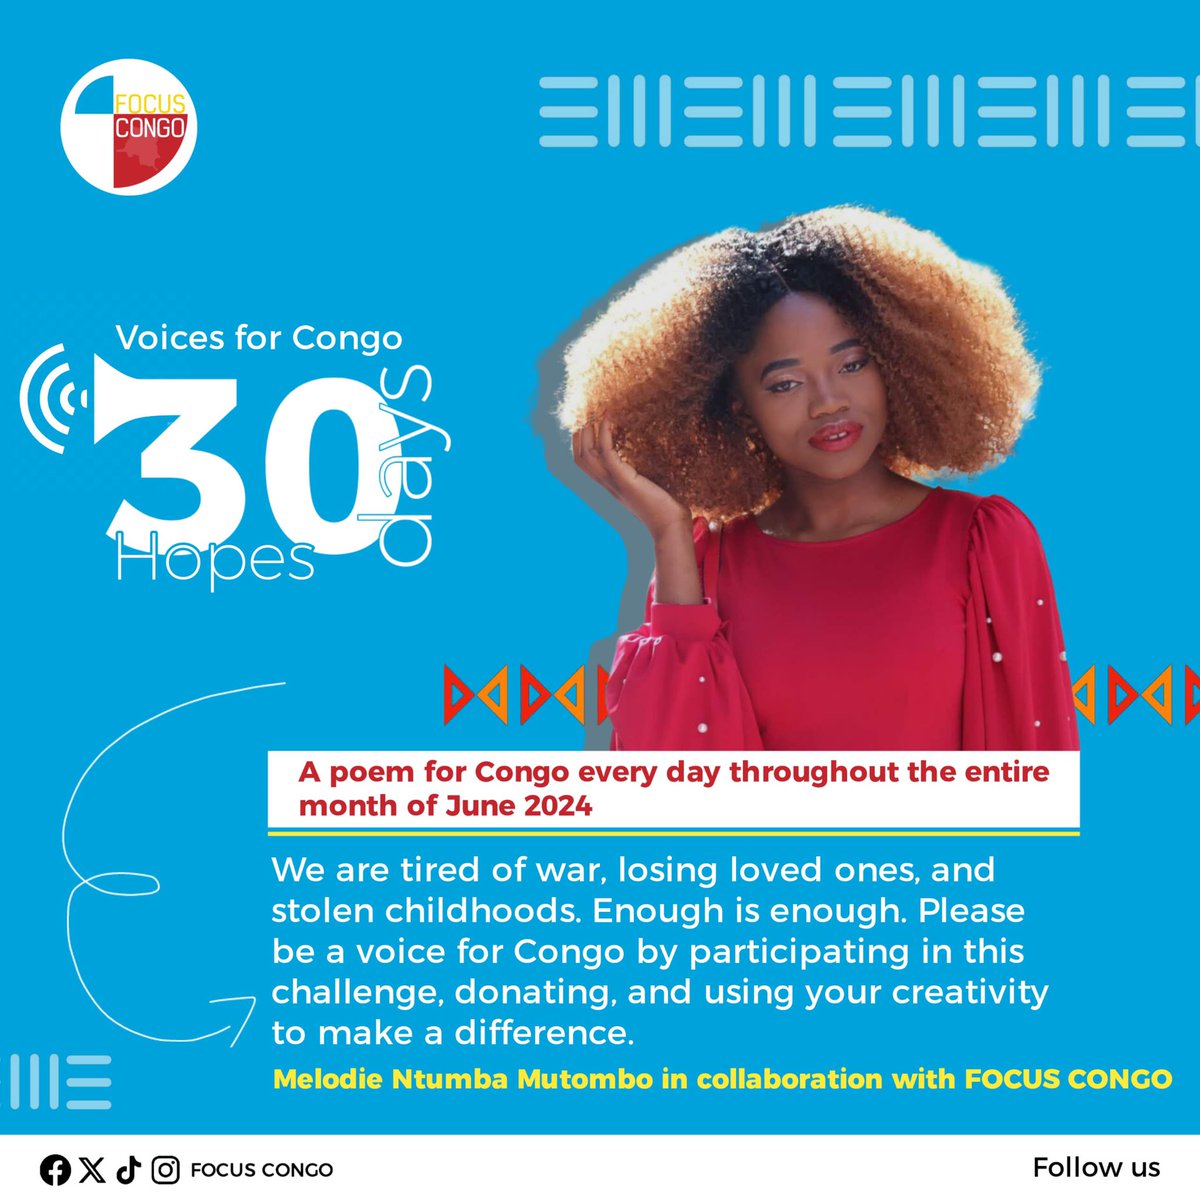 We are tired of war, losing loved ones, and stolen childhoods. Enough is enough. Please be a voice for Congo by participating in this challenge, donating, and using your creativity to make a difference.

#june #voicesforcongo #congo #focuscongo #donate #urgent